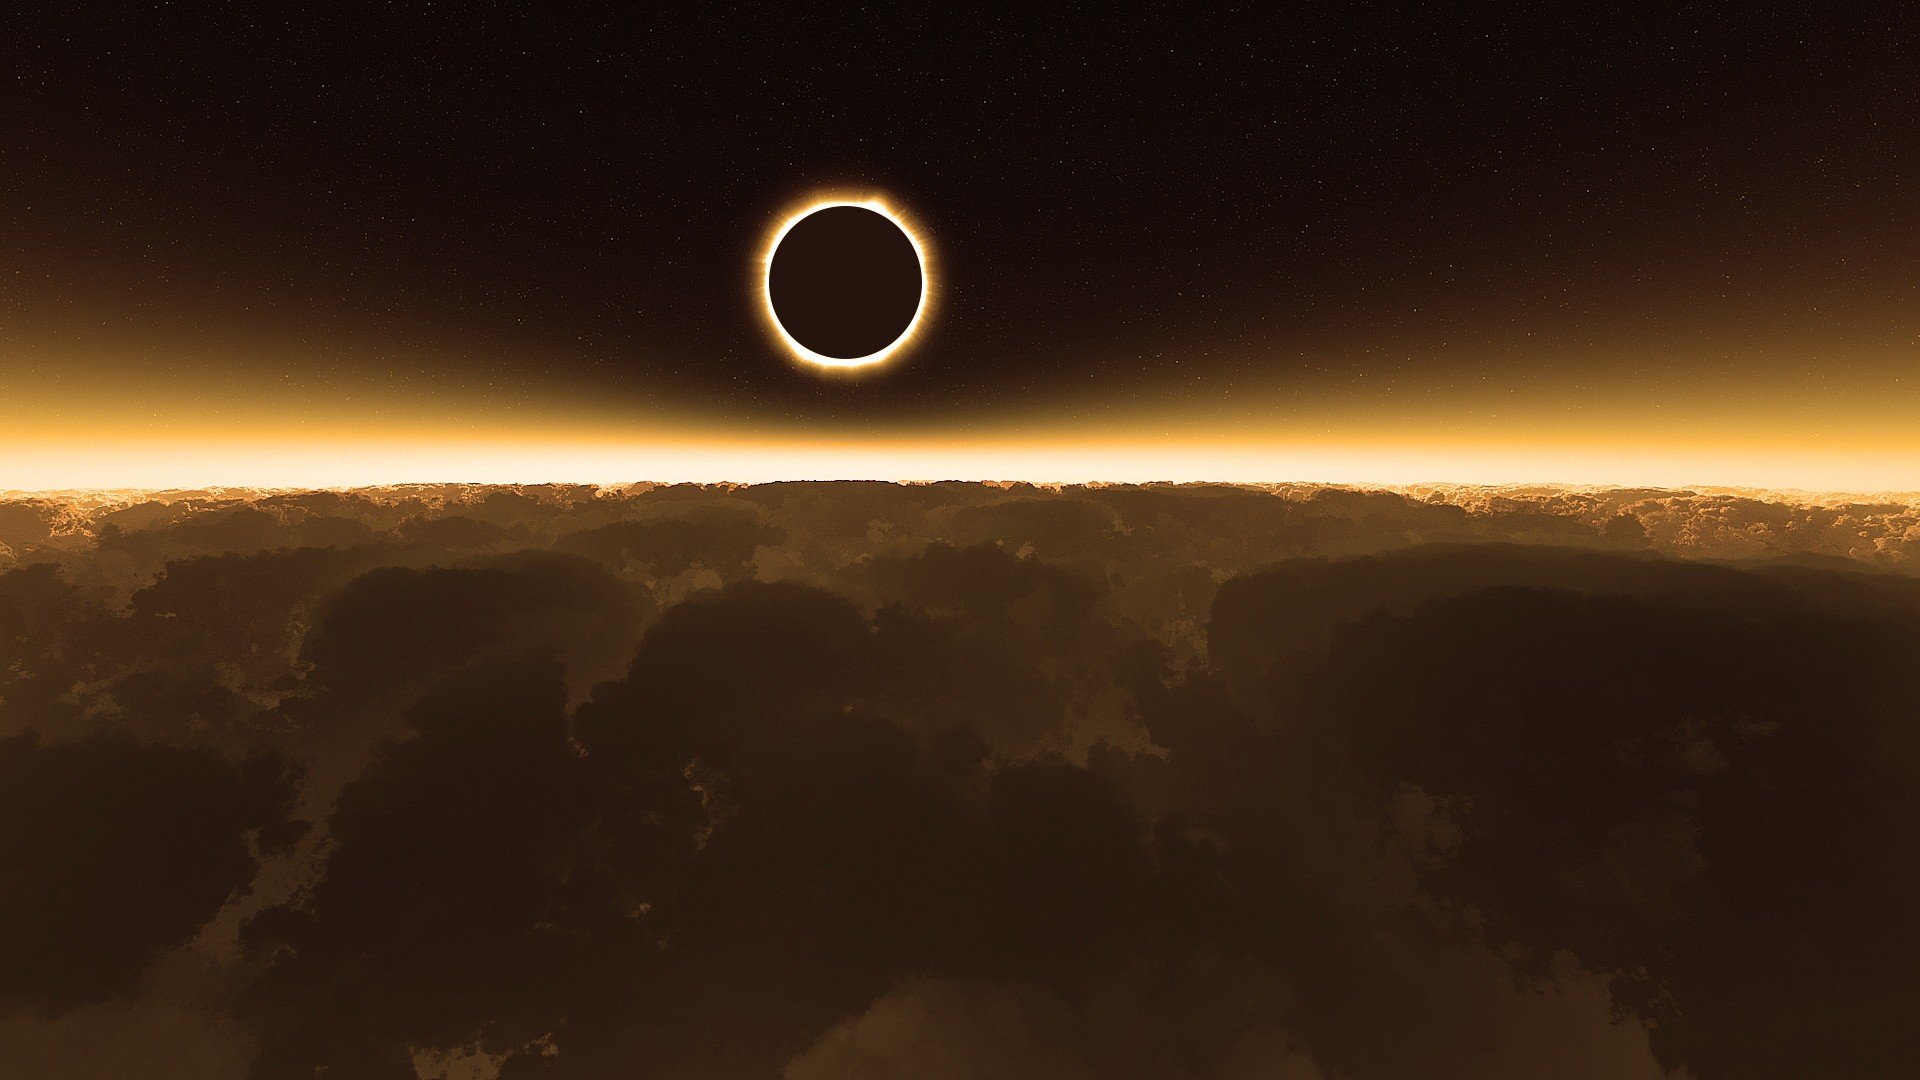  Solar Eclipse HD Wallpapers Space Nature Wallpaper Full Free Download